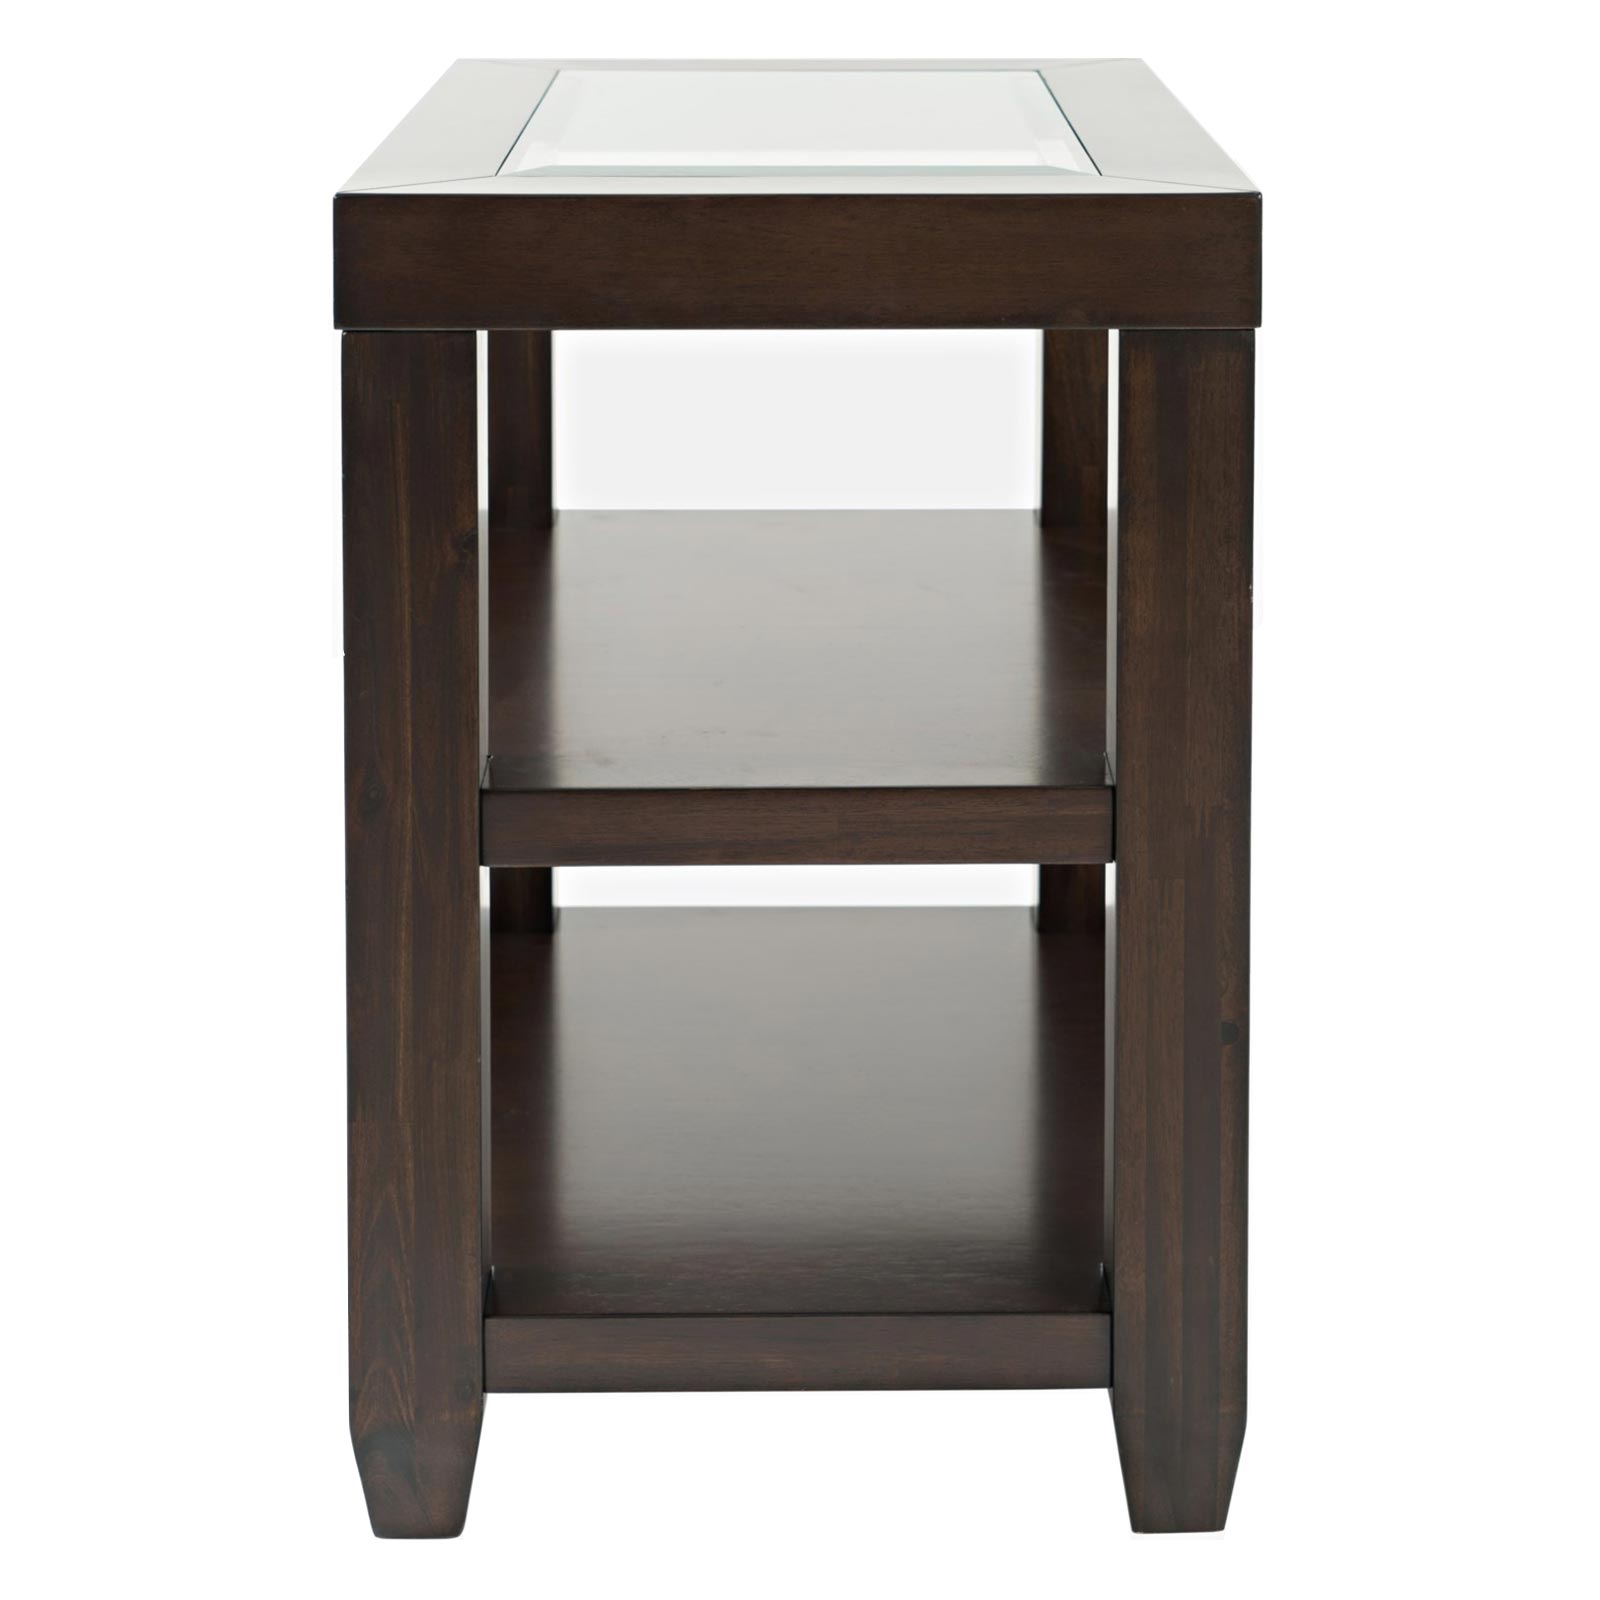 Jofran Urban Icon Brown Chairside Table